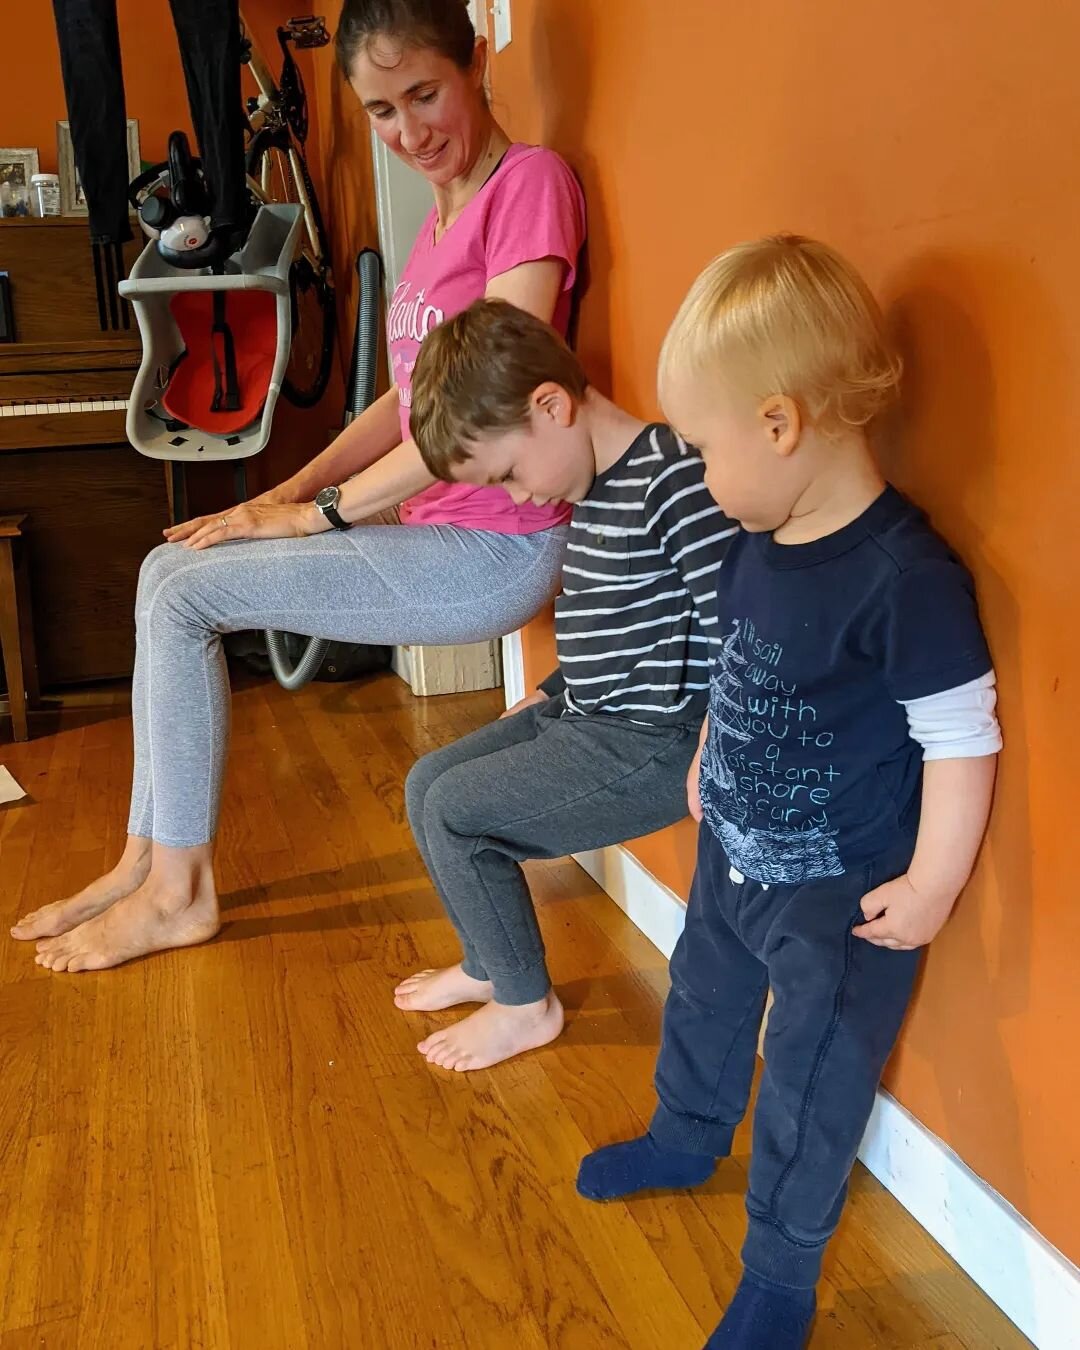 Family exercise time! It was super sweet watching both kids joining me for a wall sit (even if the baby totally ate it in true banana peel style). My older son actually knows what a burpee is now and can do one on his own! 😀😅
Some days I manage to 